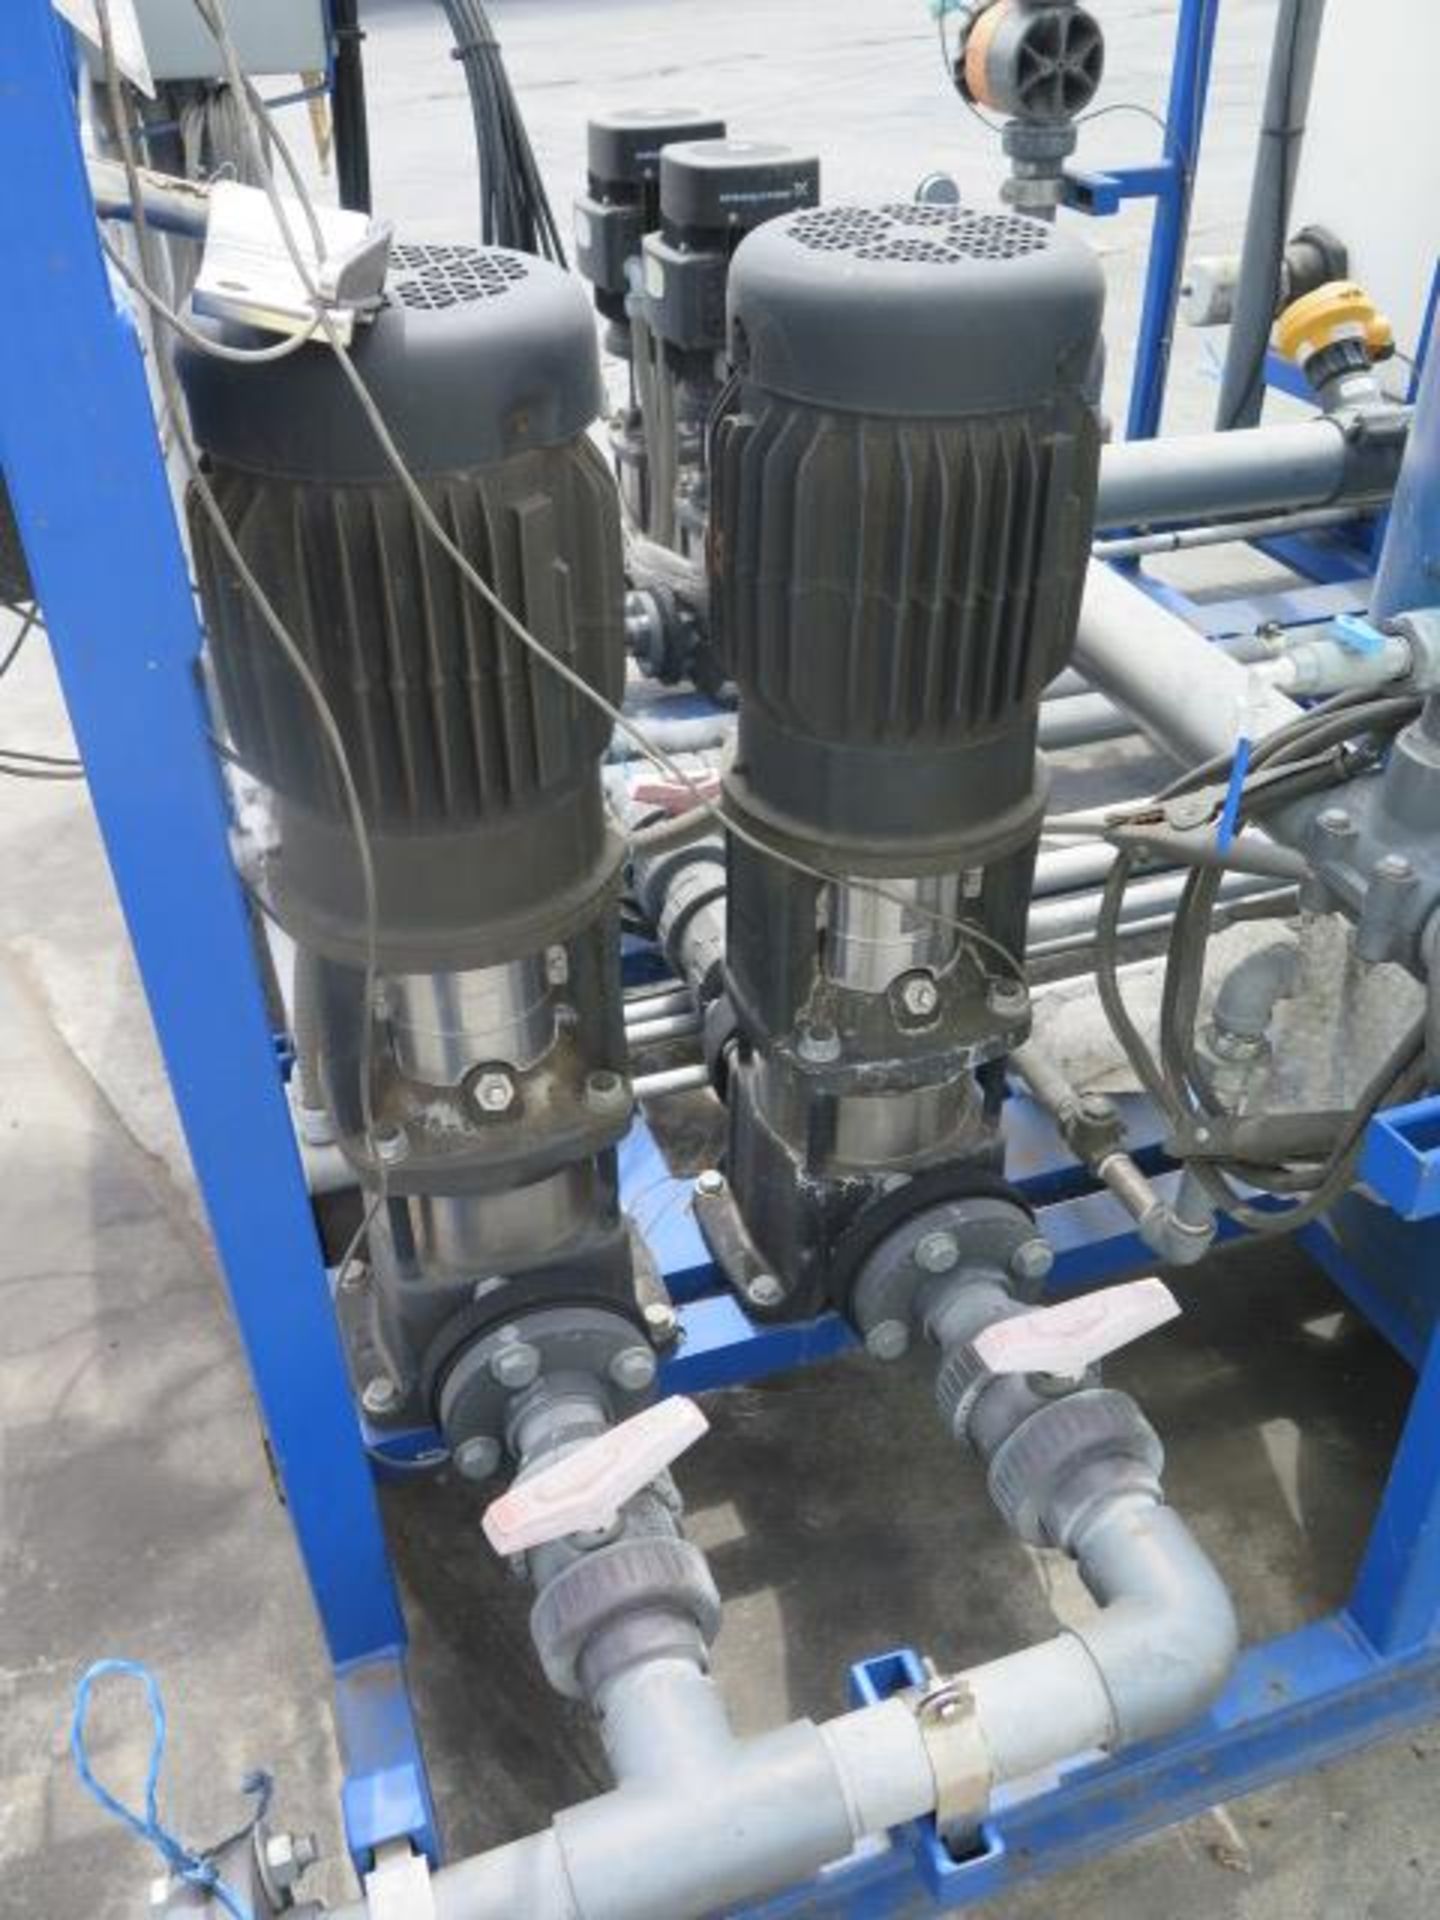 2013 SJC West "Econ MF Unit" Water Softening System w/ Seimens Simatic HMI PLC Controls, SOLD AS IS - Image 5 of 15